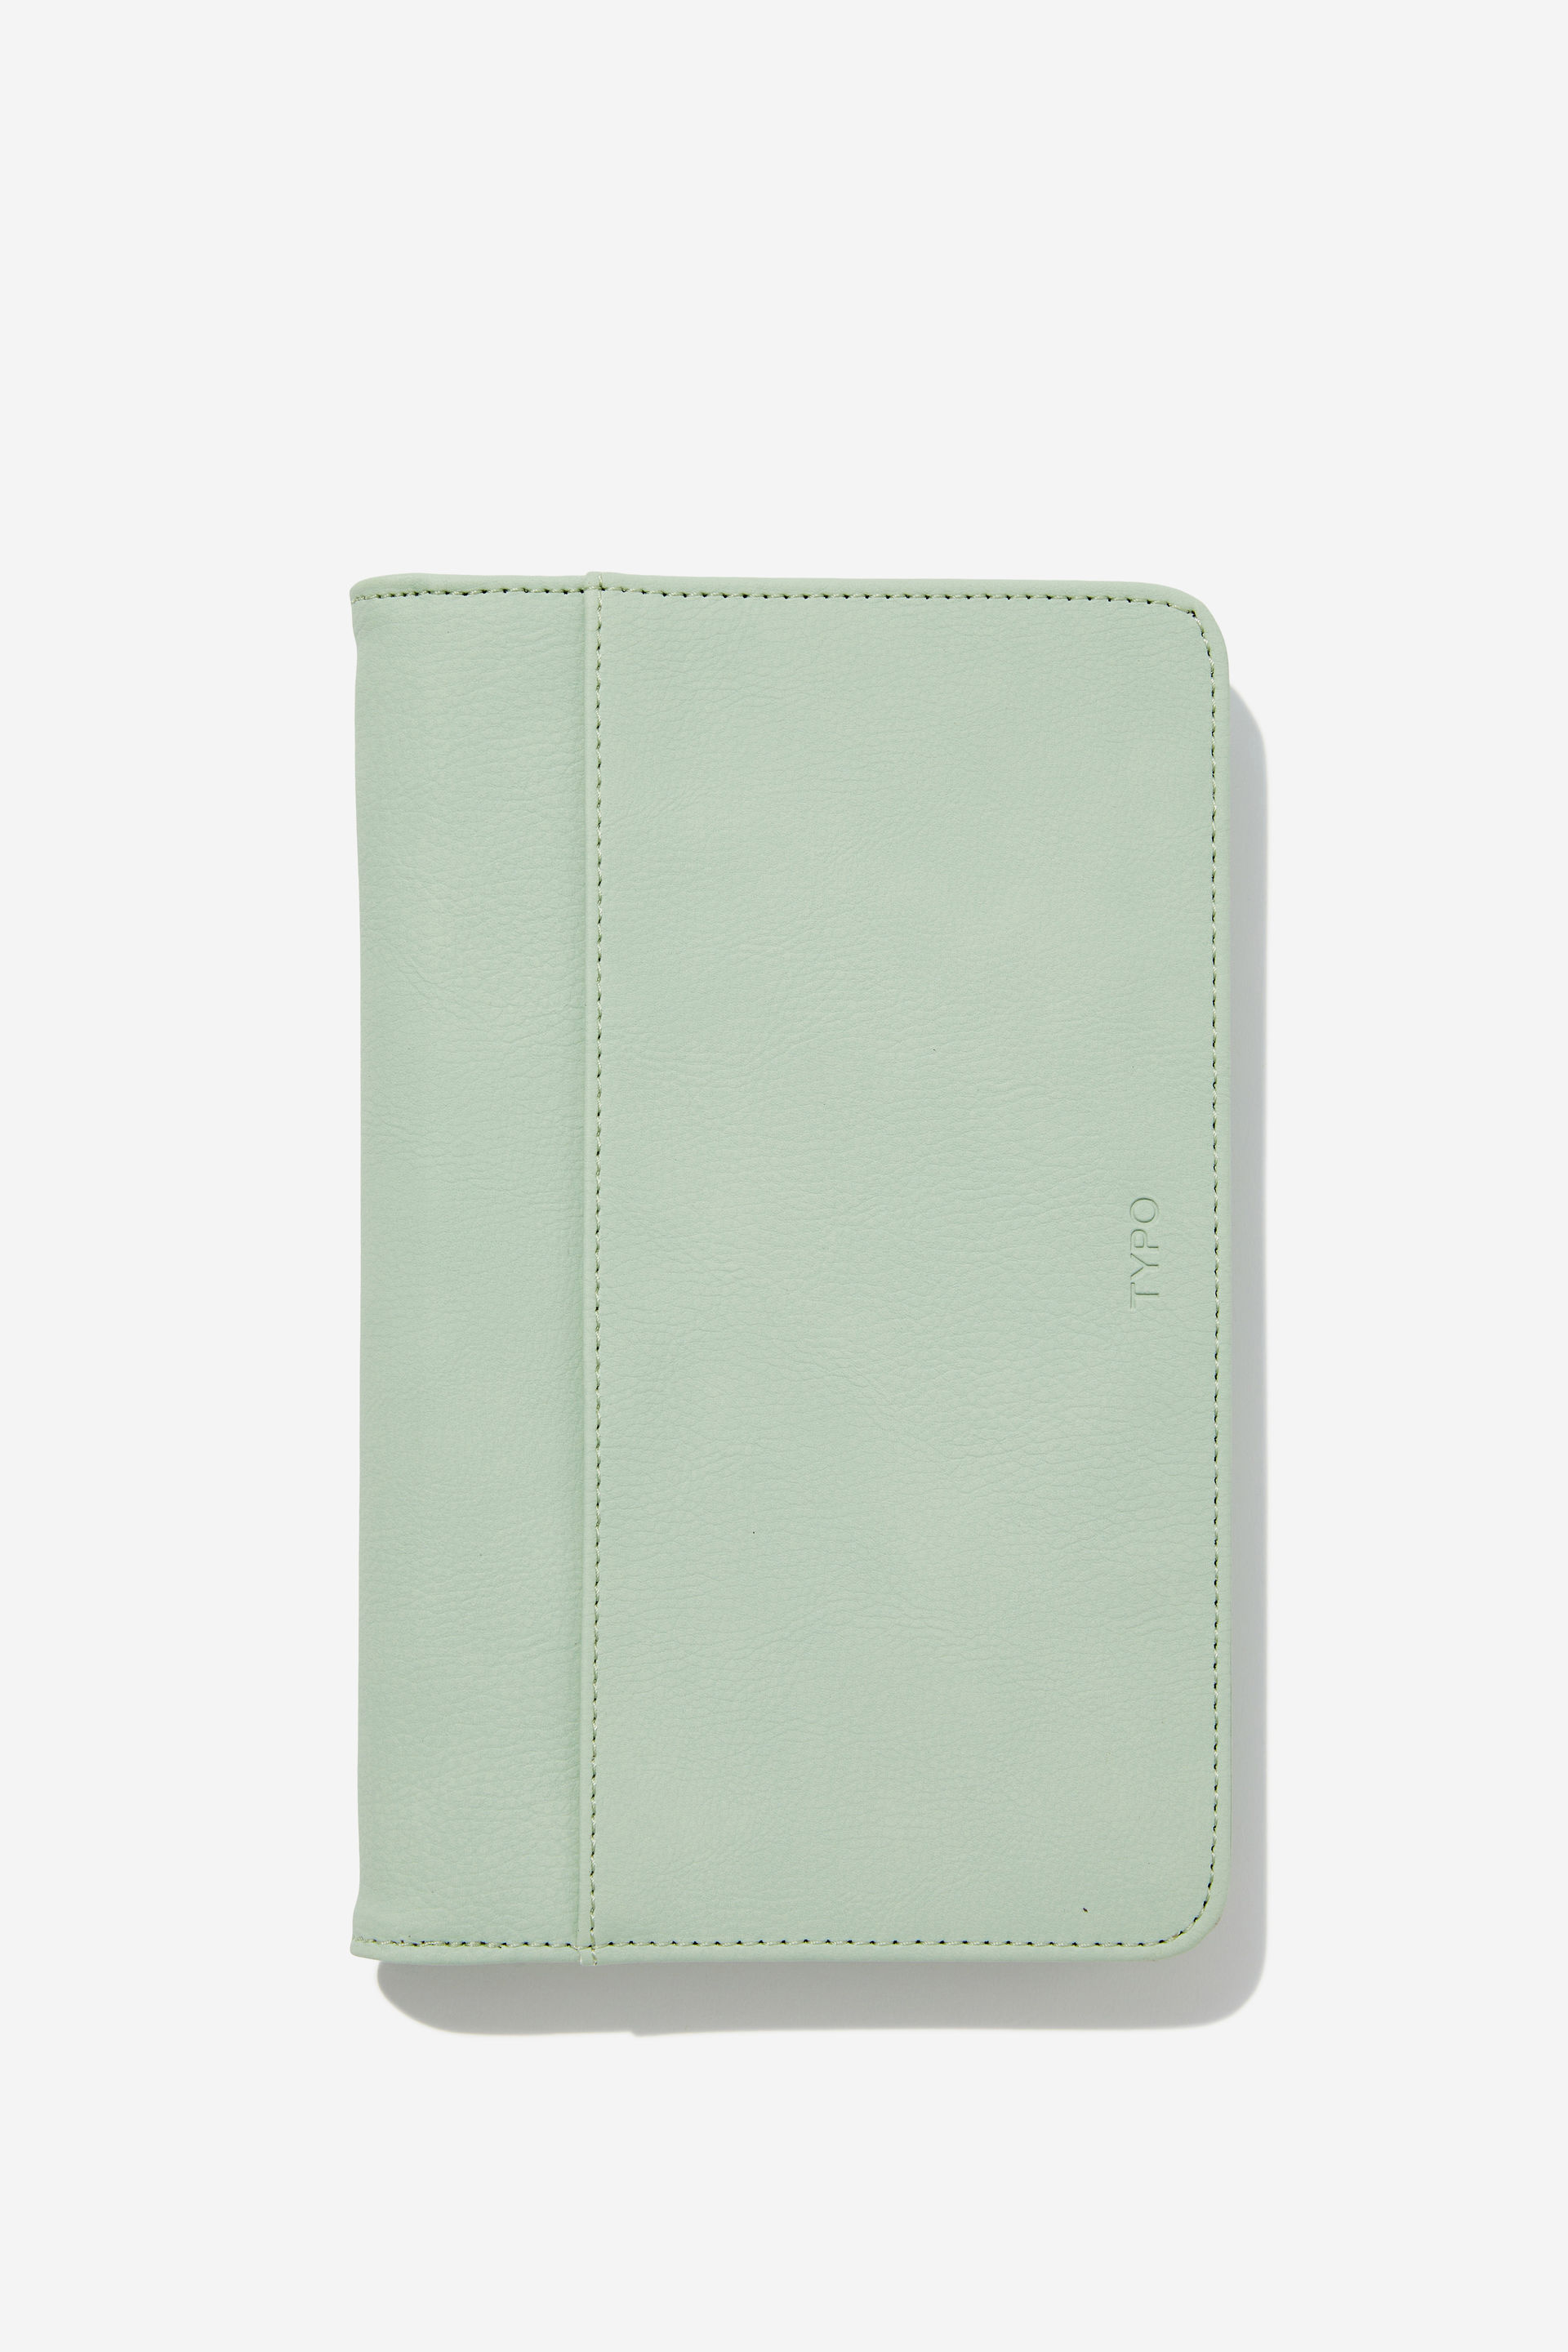 Typo - Off The Grid Travel Wallet - Smoke green